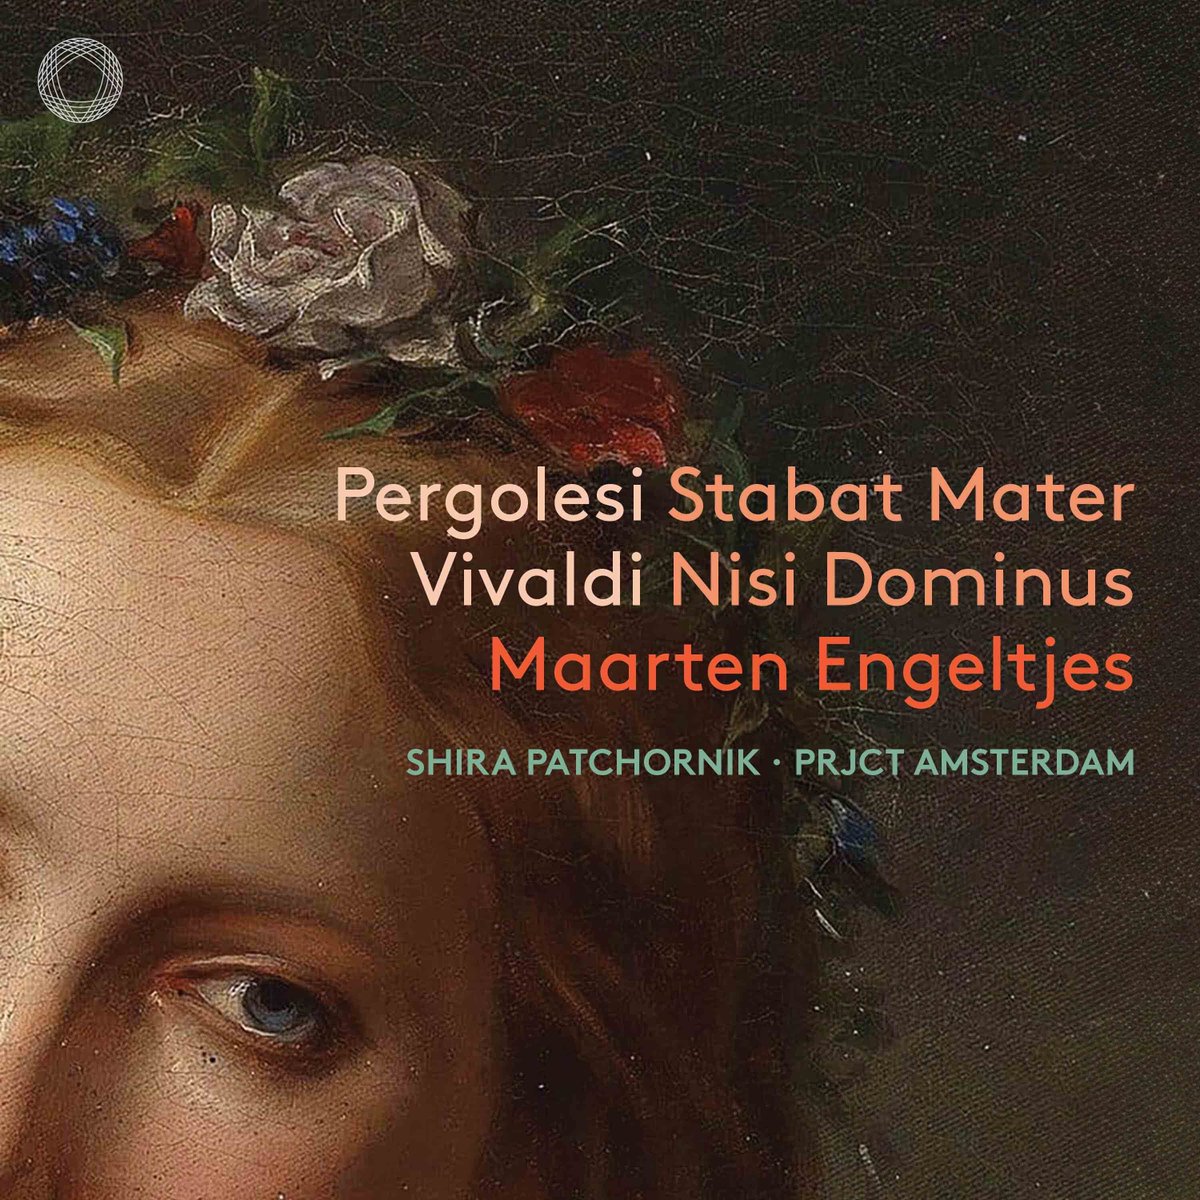 Music for Good Friday: Pergolesi's Stabat Mater, a new release from @prjctamsterdam. apple.co/PRJCT